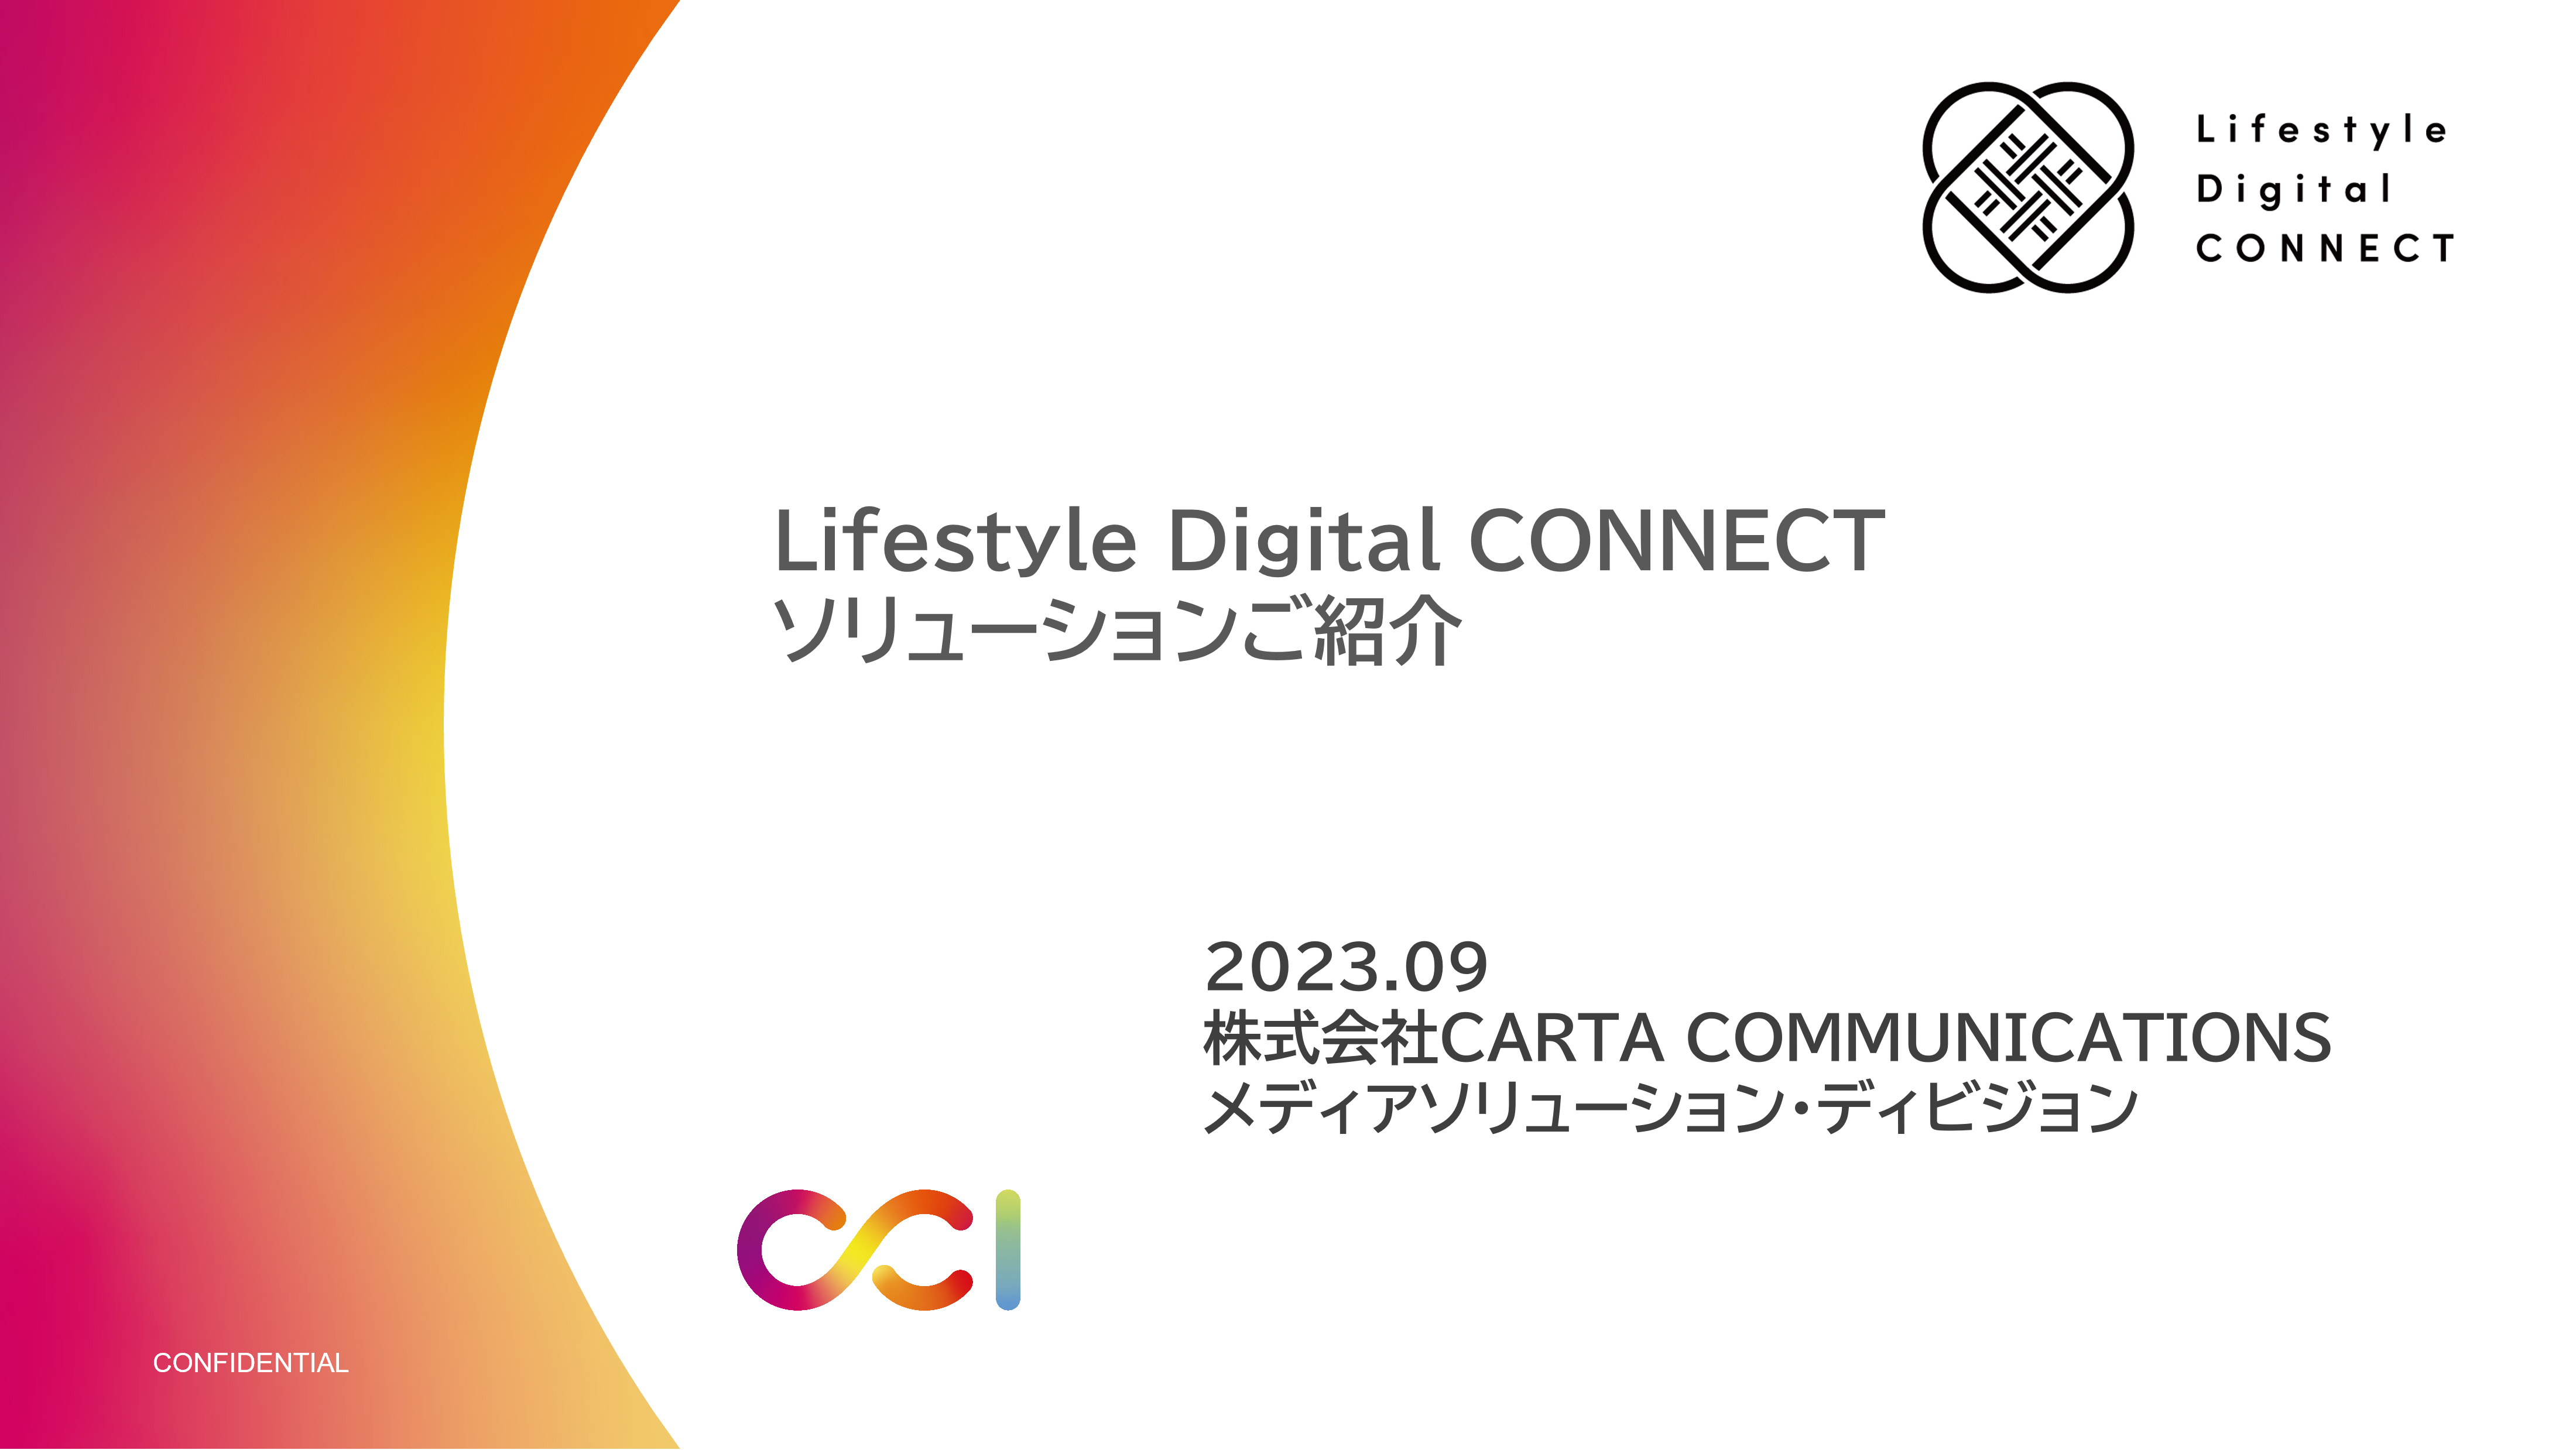 【KnowHow】【LDC_サービス資料】Lifestyle Digital CONNECT